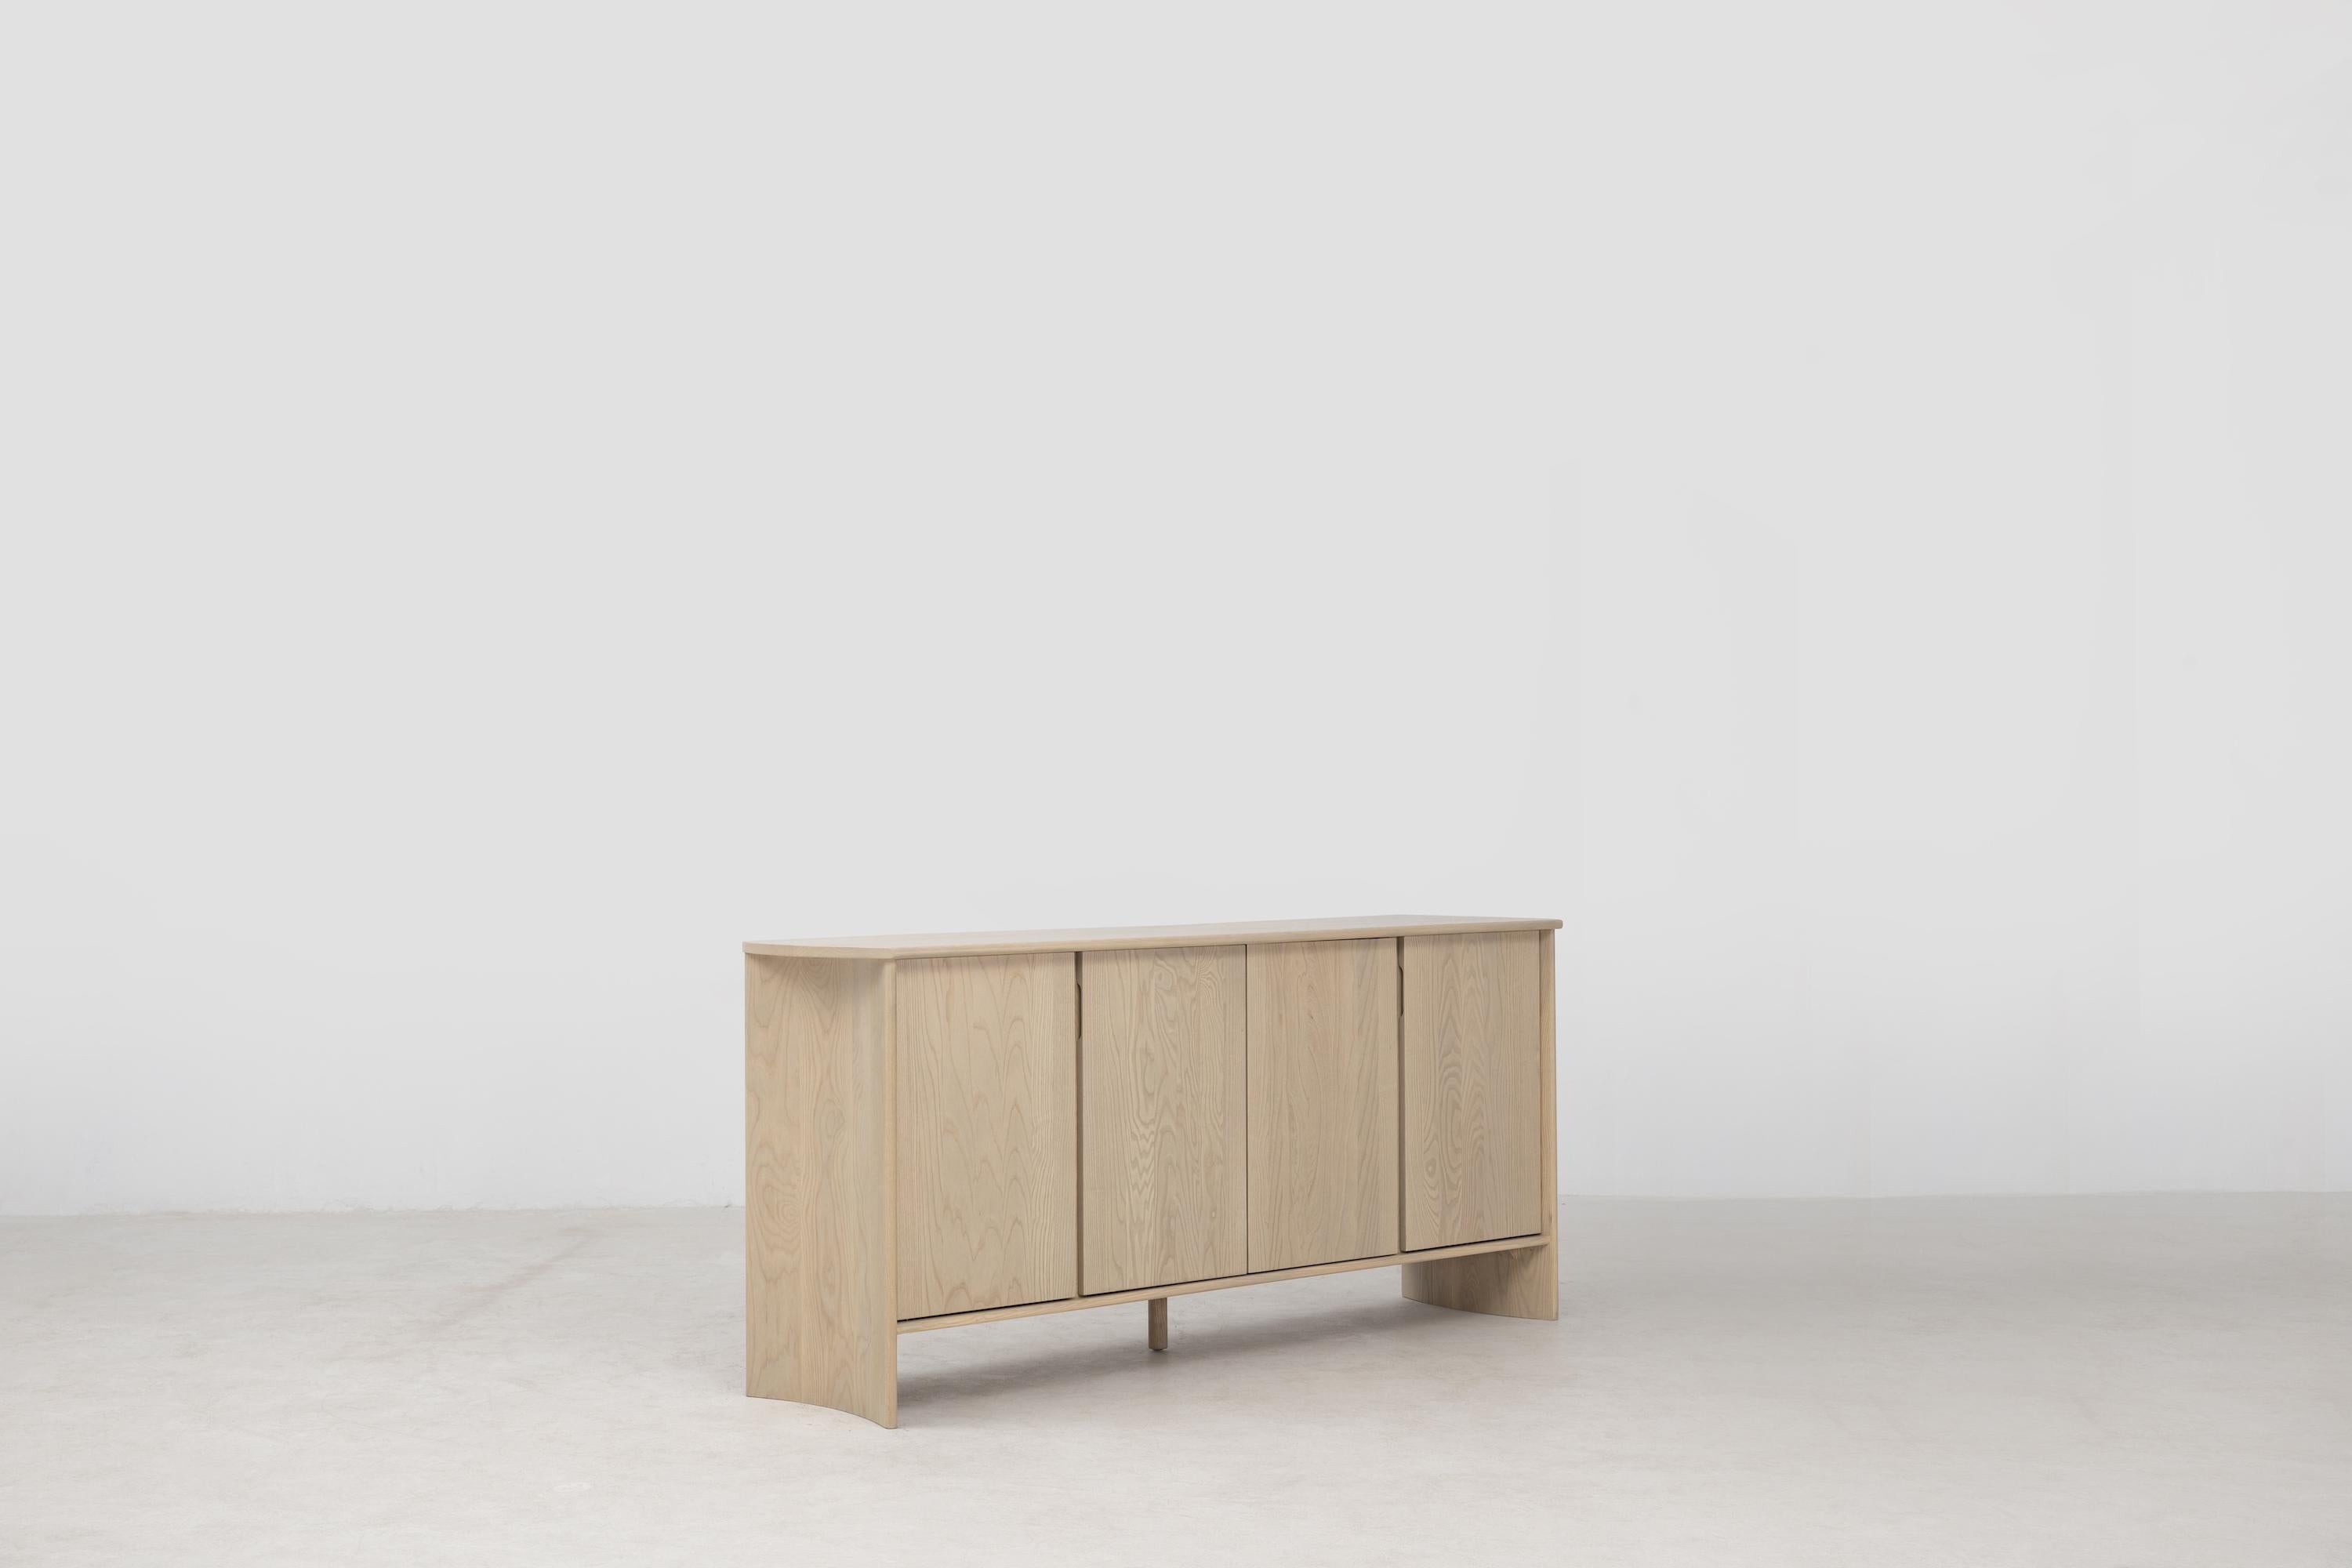 The Crest Sideboard is an extension of the classic Crest collection, featuring the curved columnar legs of the classic Crest Table. The sideboard frame is made using traditional joinery, with nails and screws used only for the drawer hardware. The